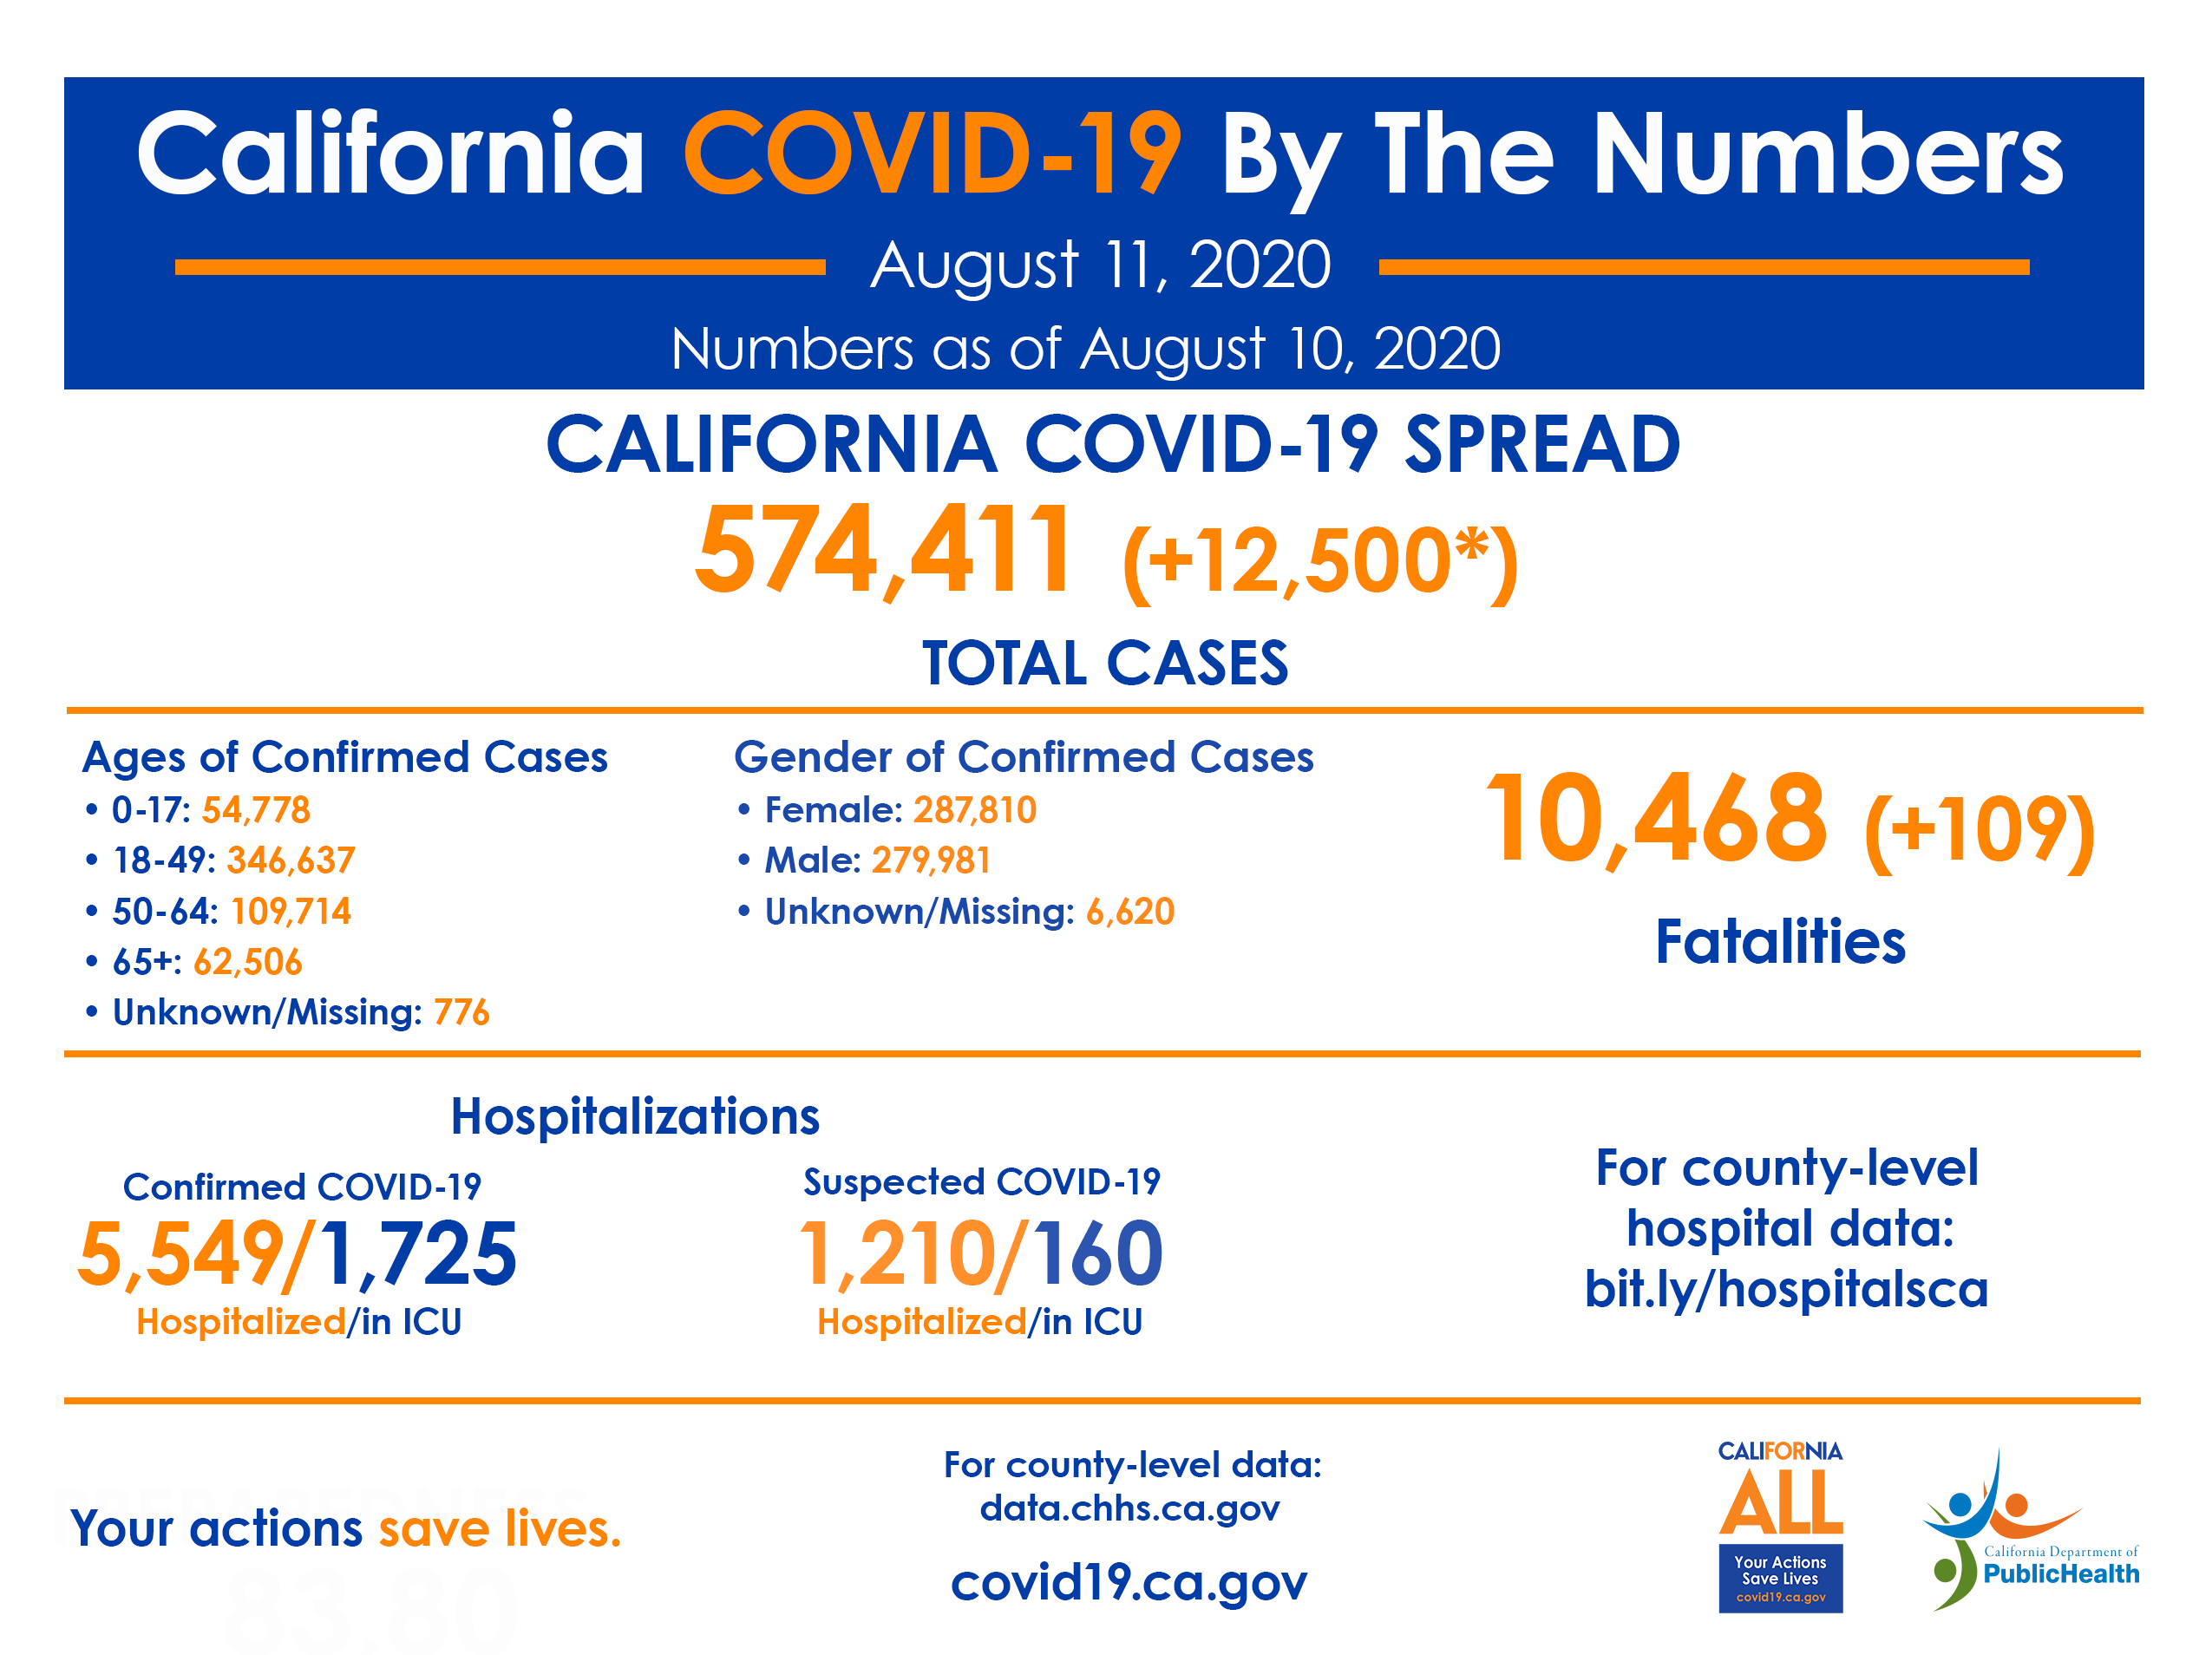 California COVID-19 By the Numbers